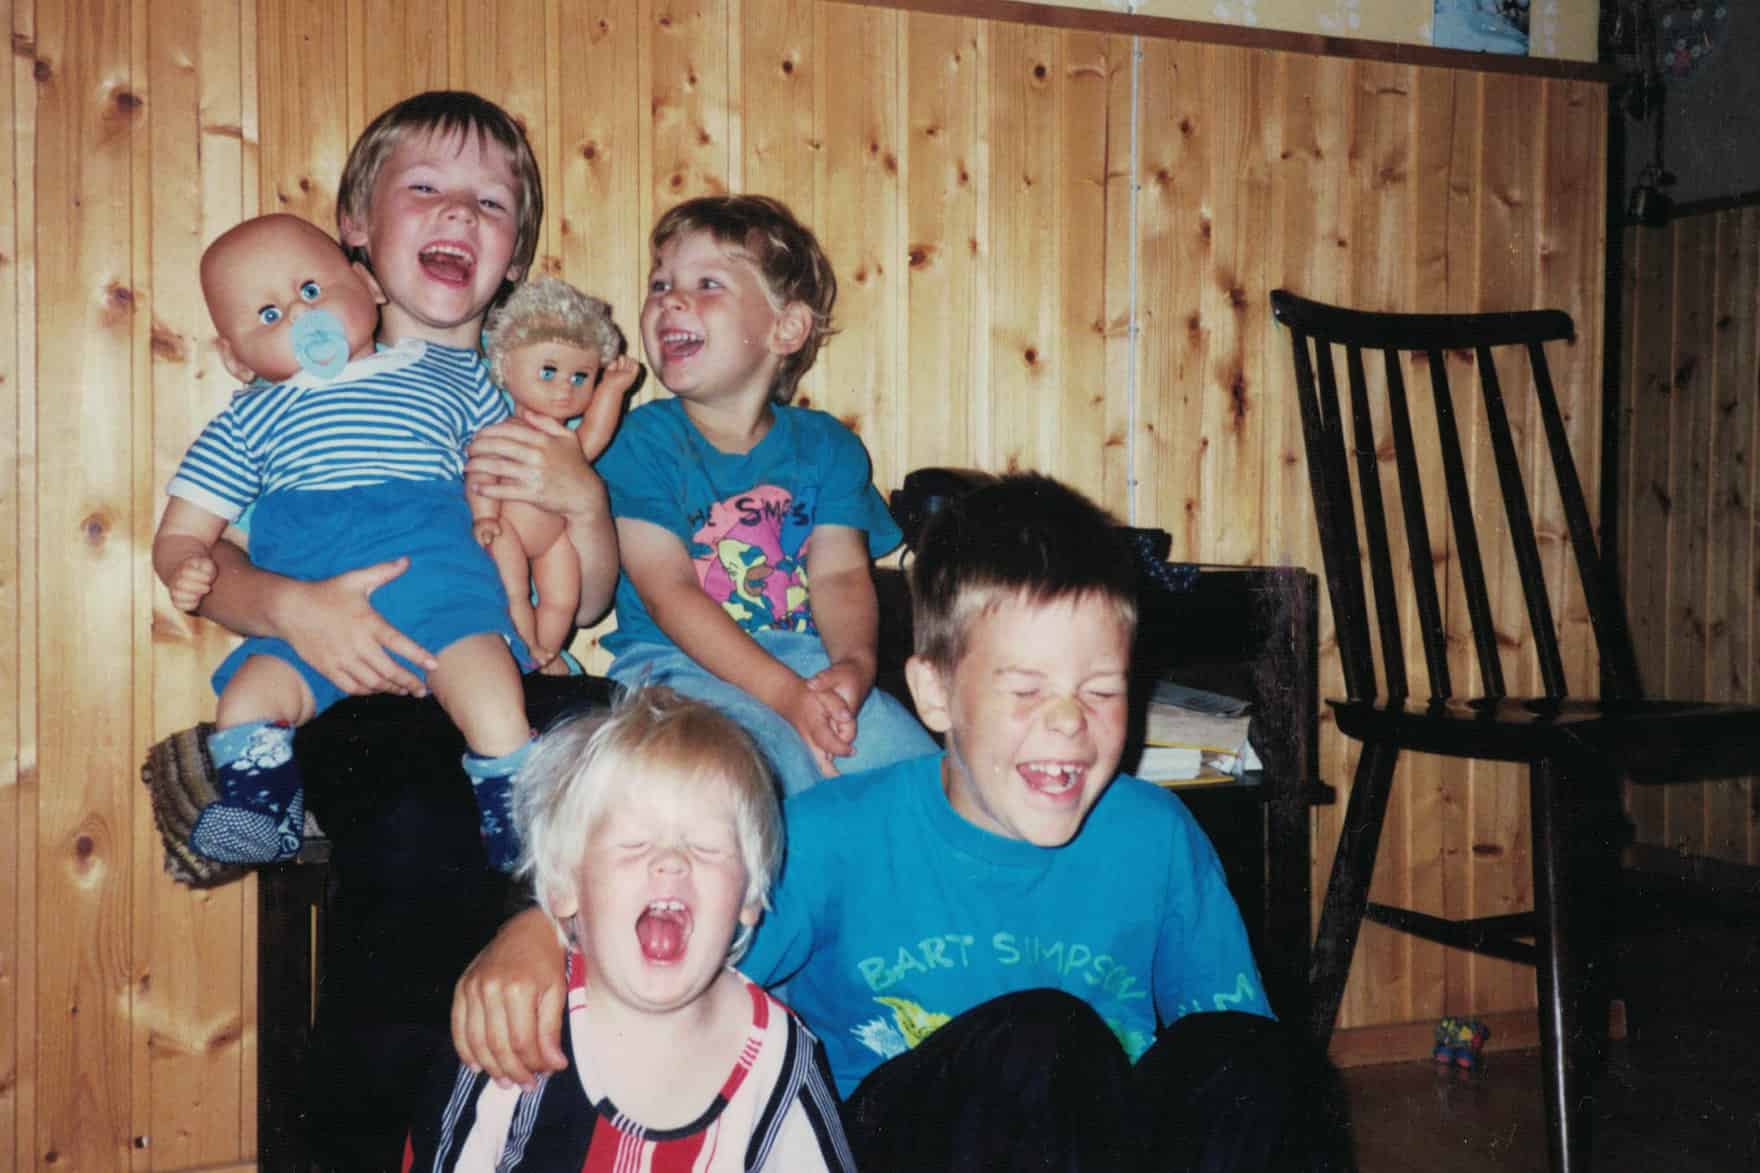 Carlos and siblings laughing hysterically, 1992.